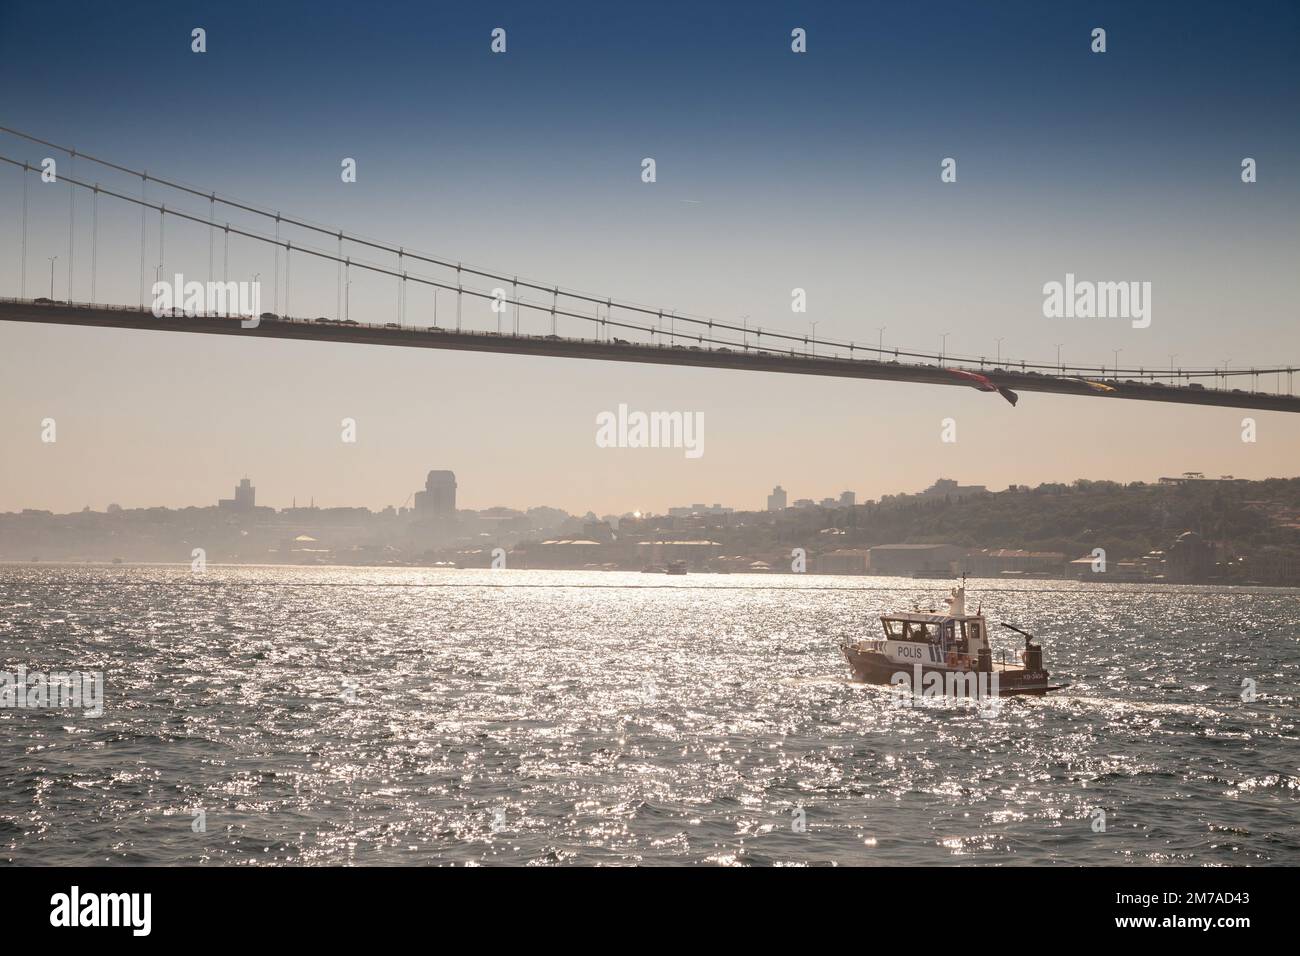 Picture of police boat from the  Police of Turkey patrolling on the marmara sea, on the bosphorus straight in Istanbul, Turkey. The Turkish Police For Stock Photo